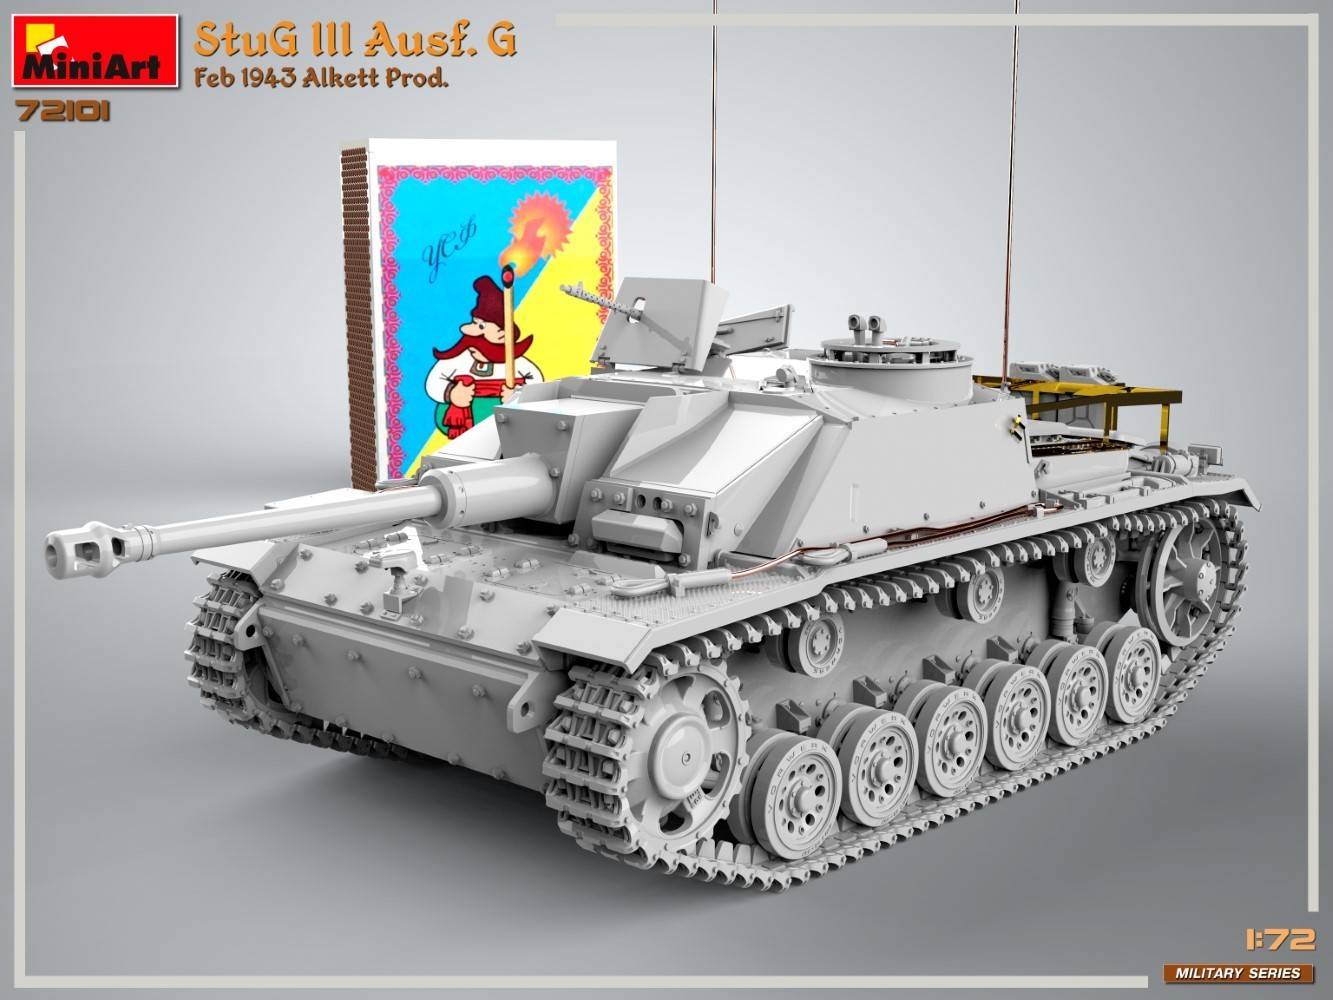 New Military Series Announced in 1/72 Scale, Starting with StuG III Ausf. G CAD-1